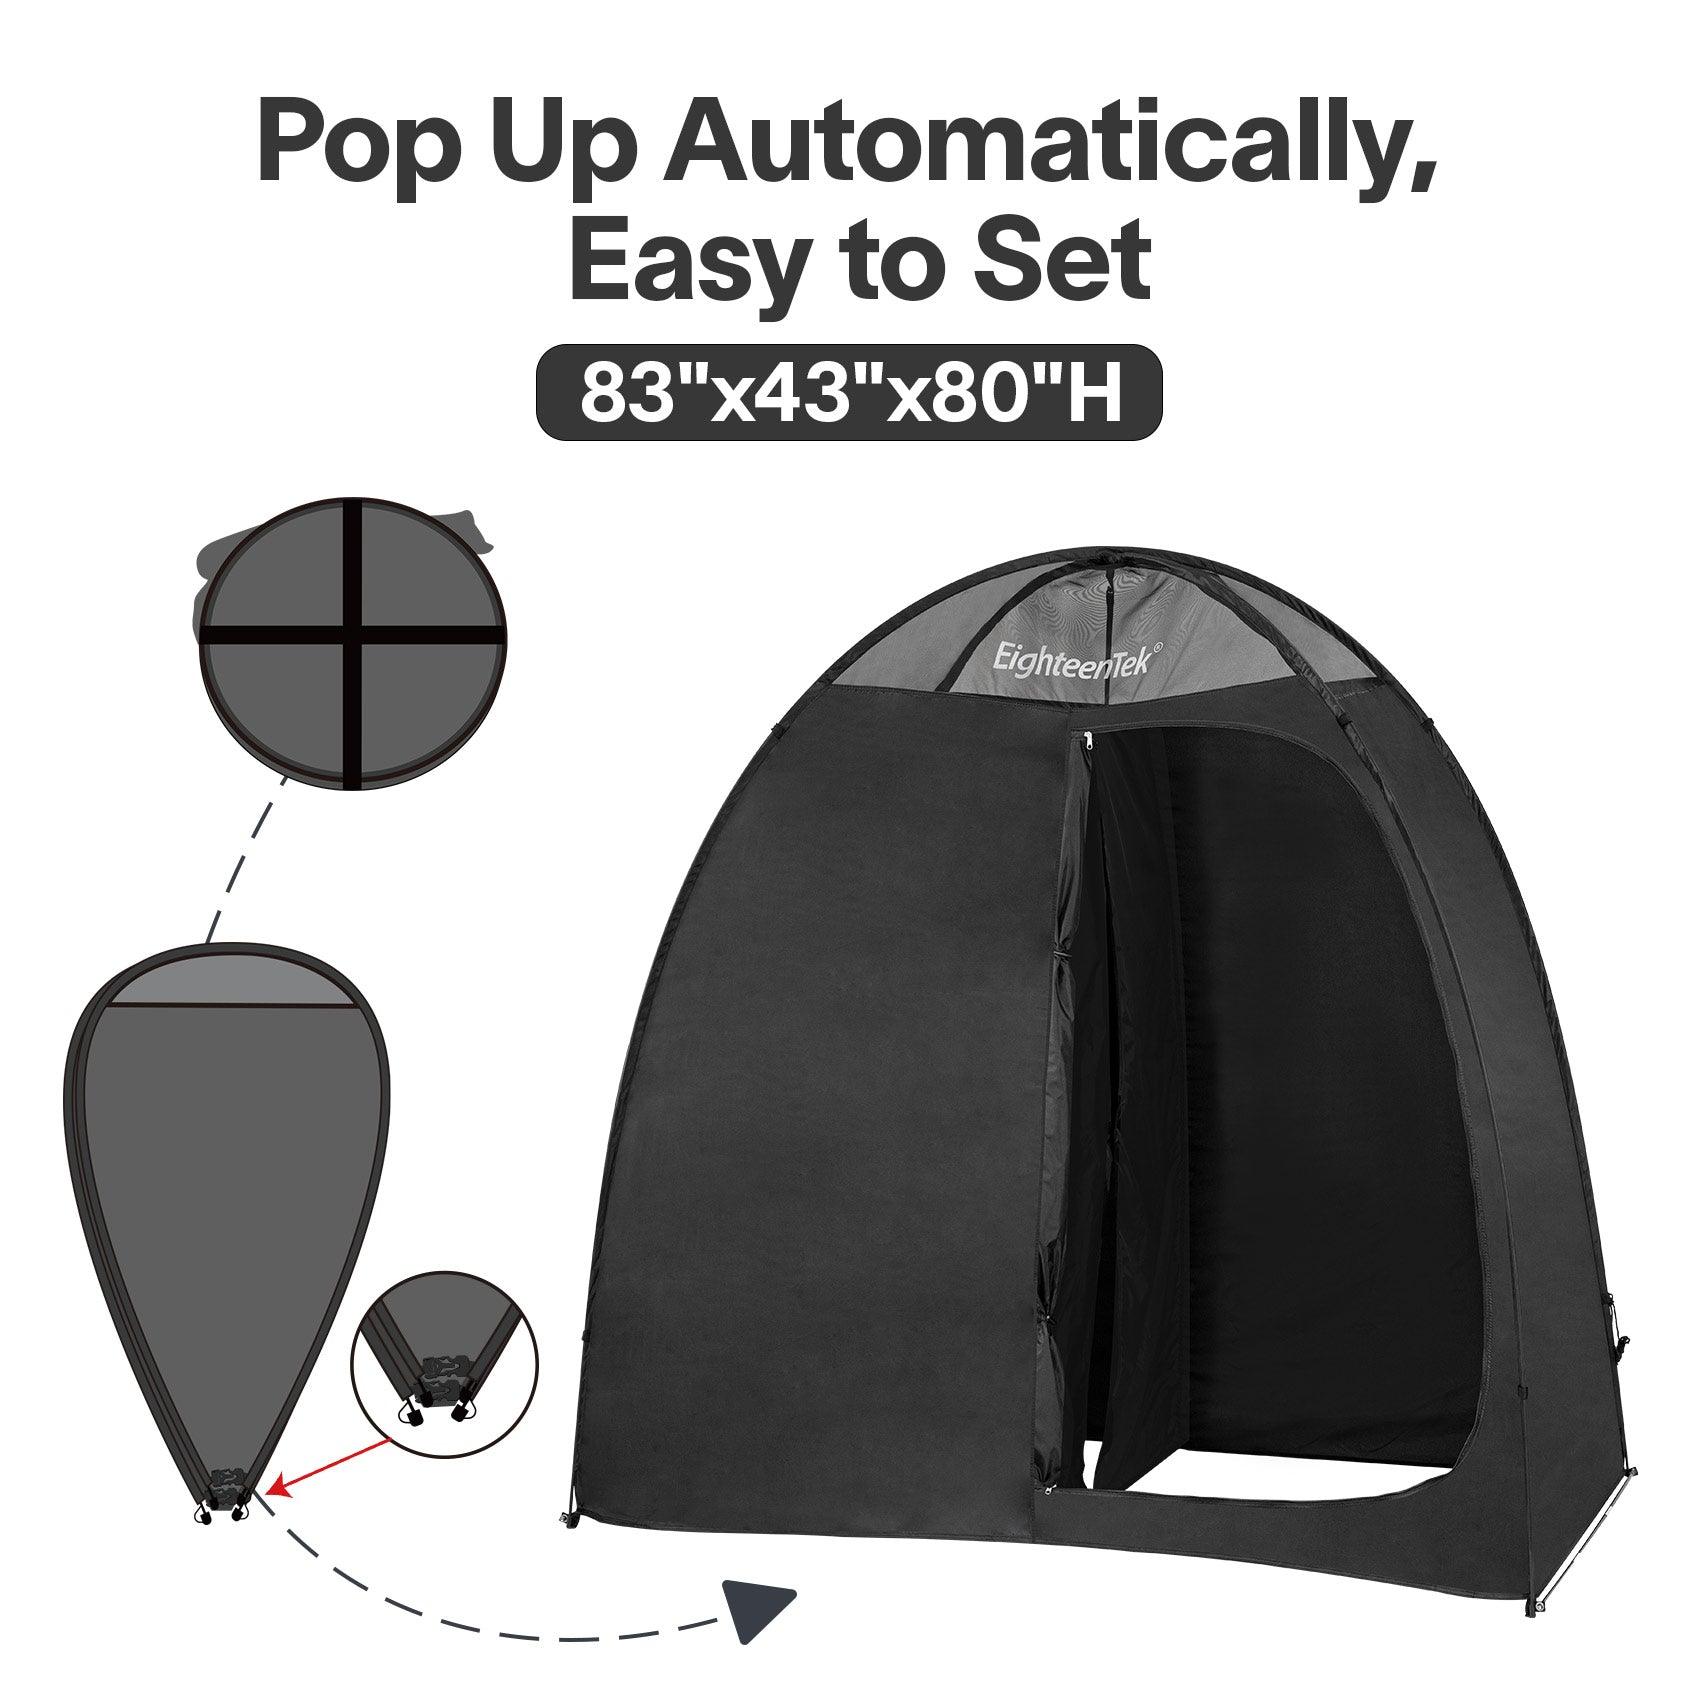 EighteenTek Pop Up Shower Tent Changing Room 2 Rooms Outdoor Camping Toilet Portable Privacy Dressing Shelter